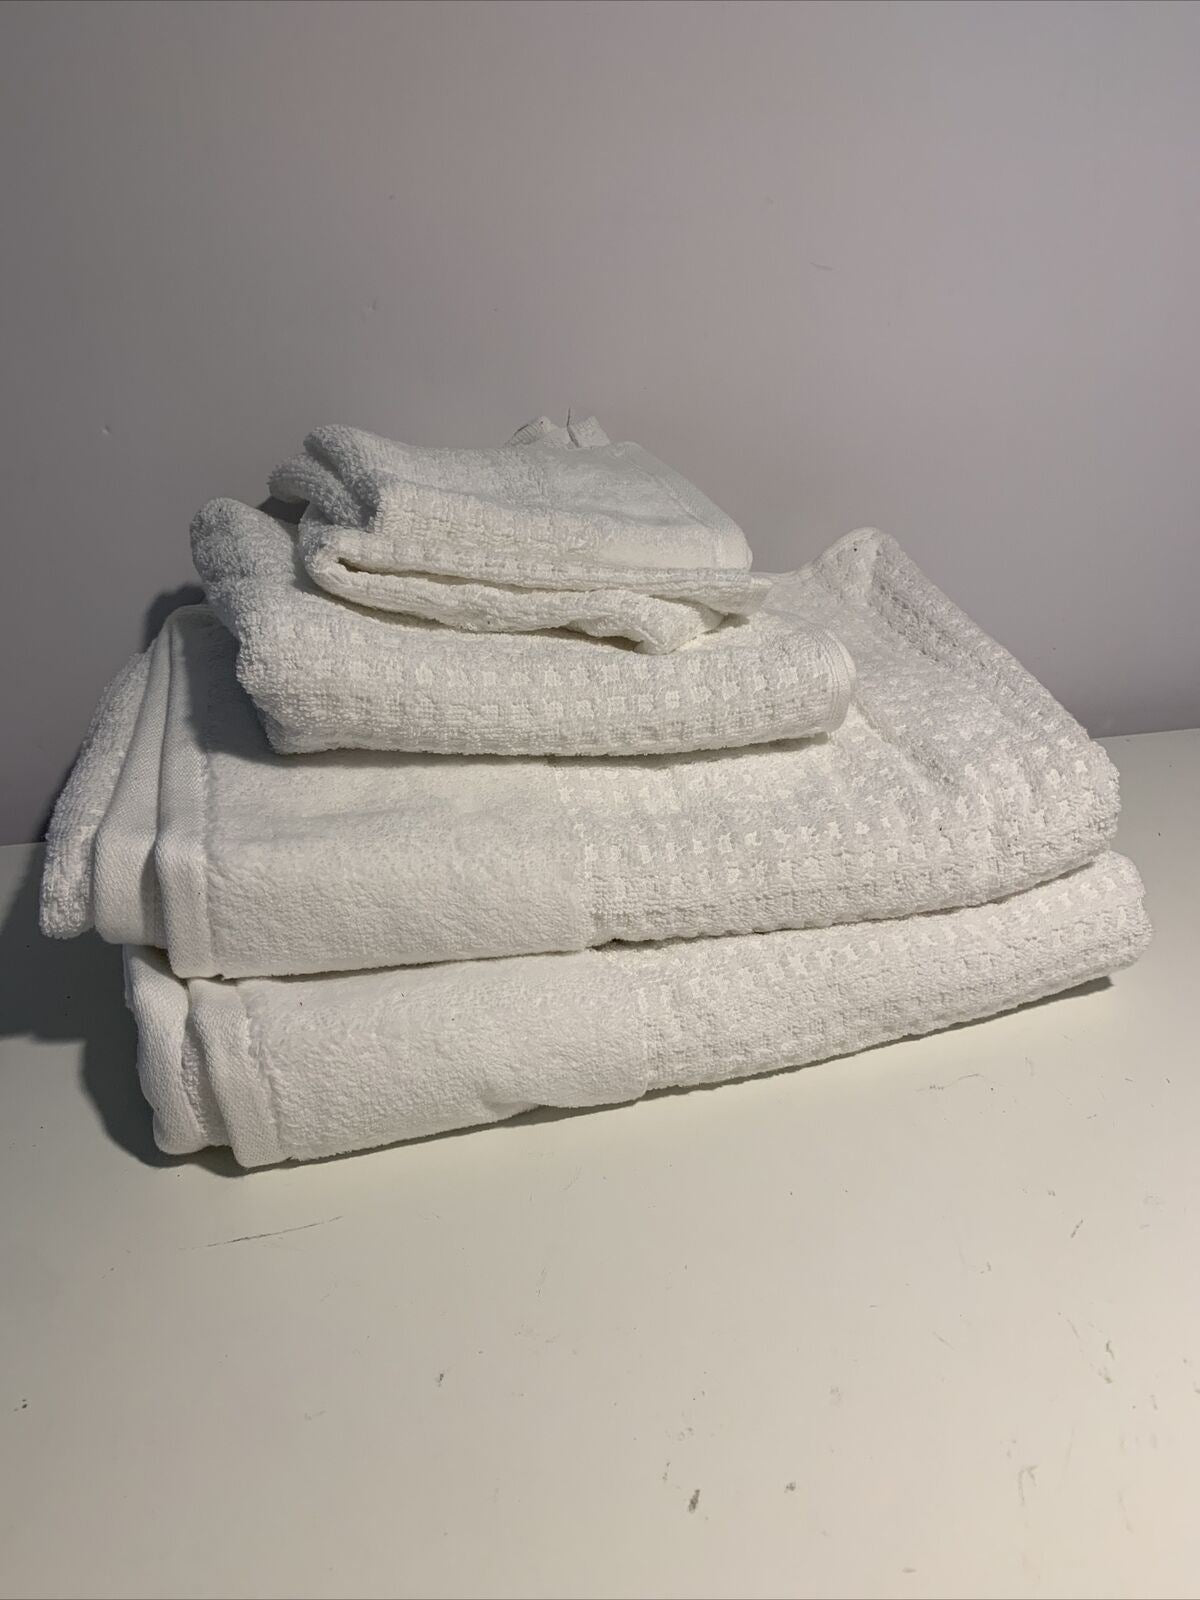 Madison Park Spa 5 Piece 100 Percent Cotton Waffle Towel Set in White